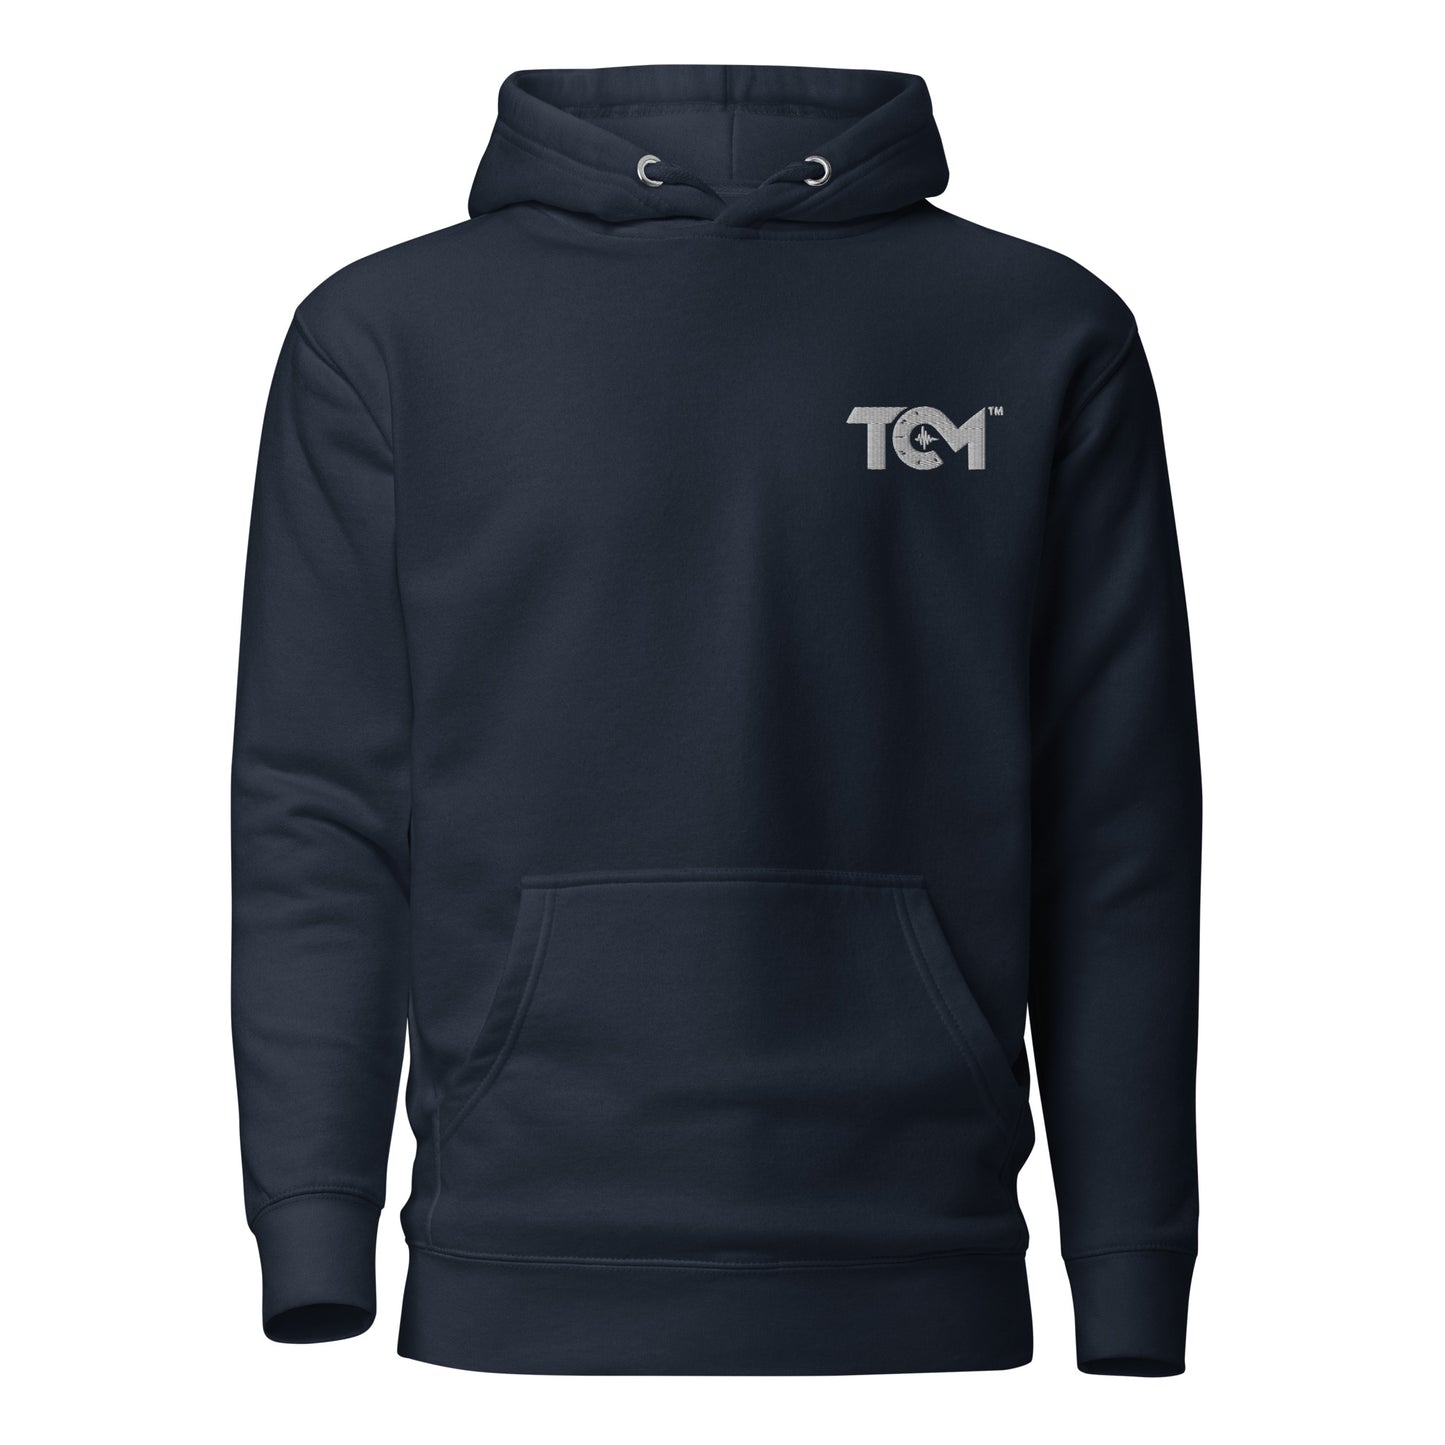 TCM embroidered hoodie, Psalms 23:4